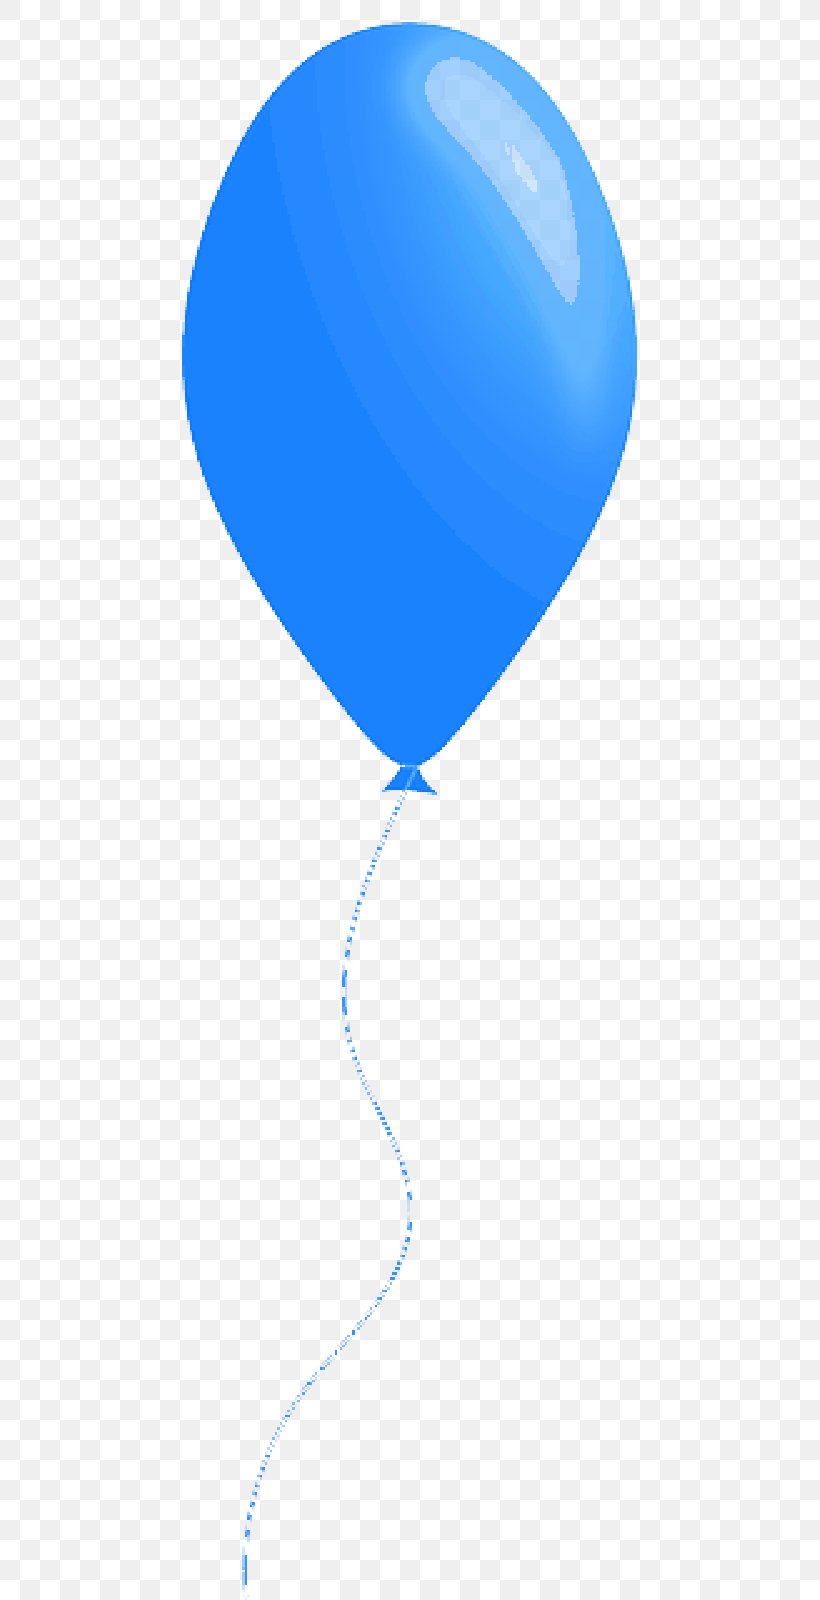 Product Design Balloon Font Line, PNG, 800x1600px, Balloon, Azure, Blue, Electric Blue, Hot Air Balloon Download Free